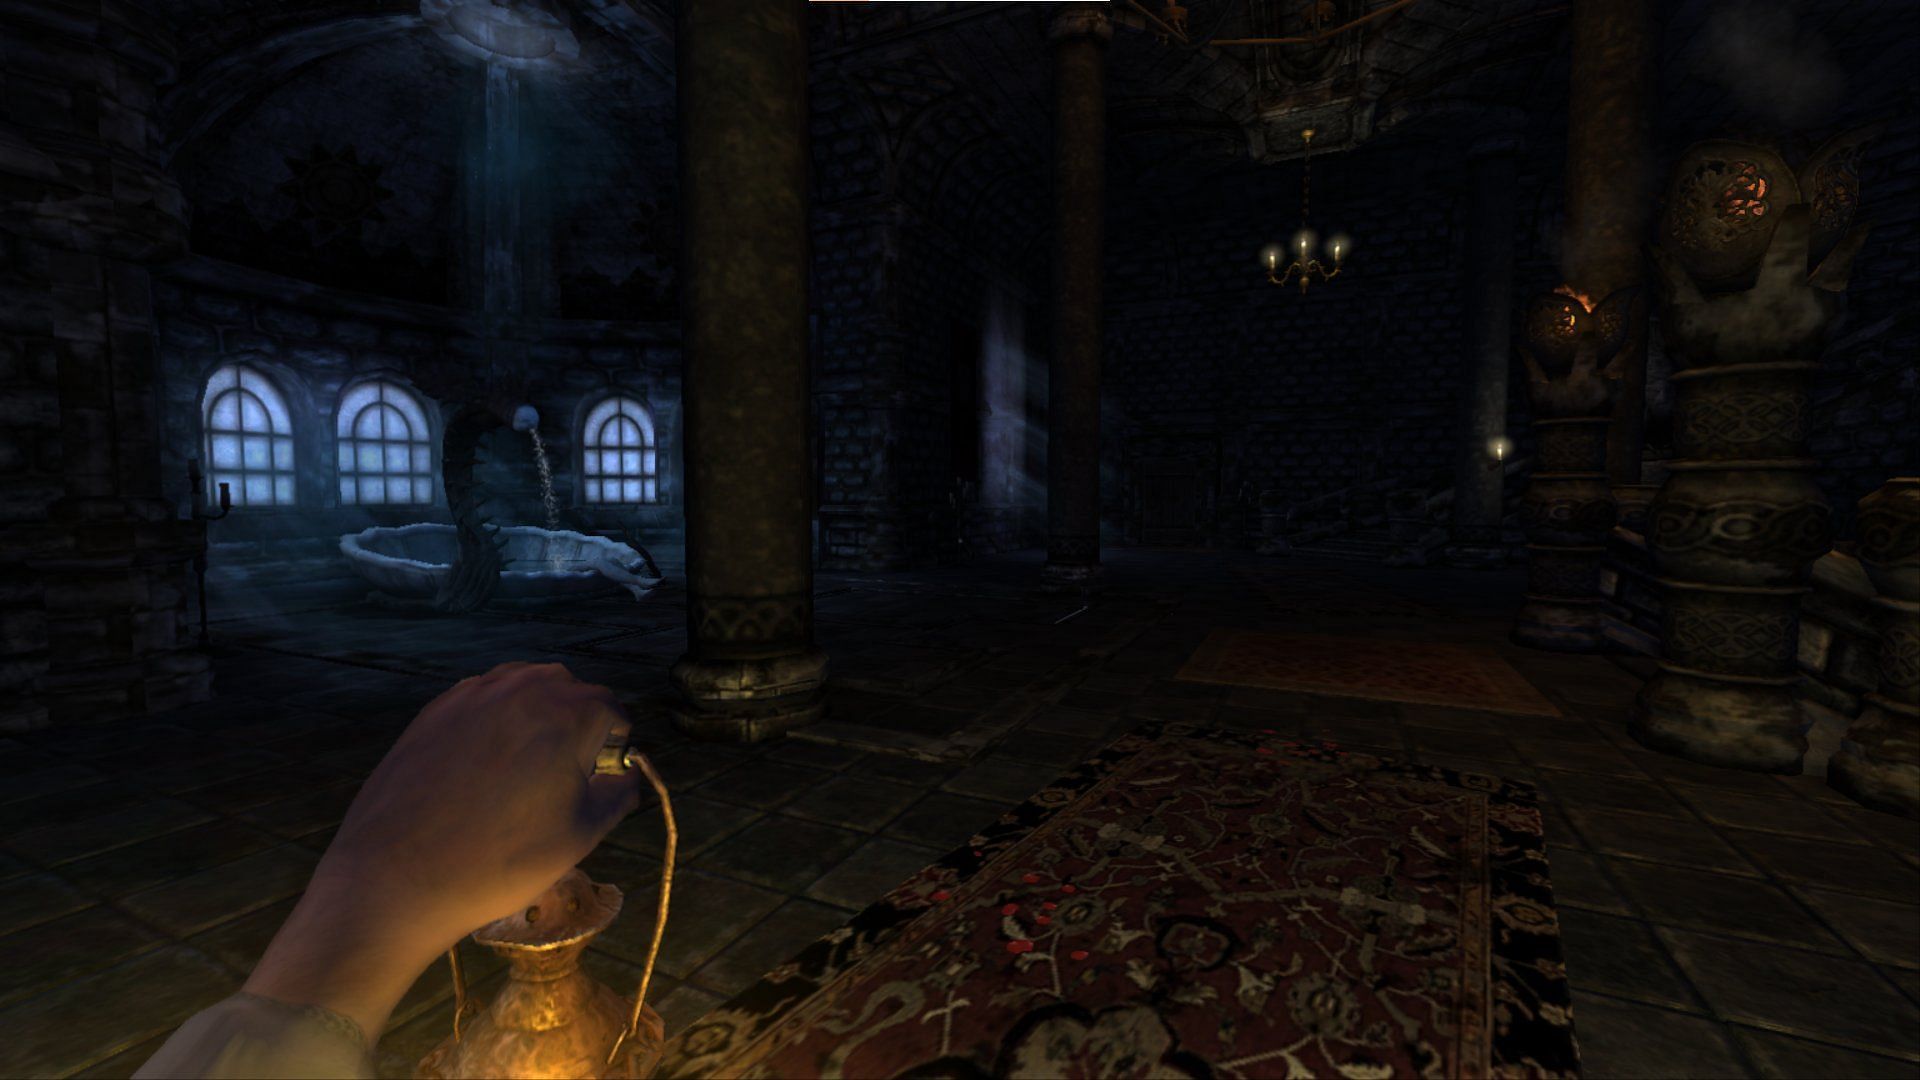 Amnesia: The Dark Descent is relentless in its quest to scare the player (Image via Twitter/@solbrah)